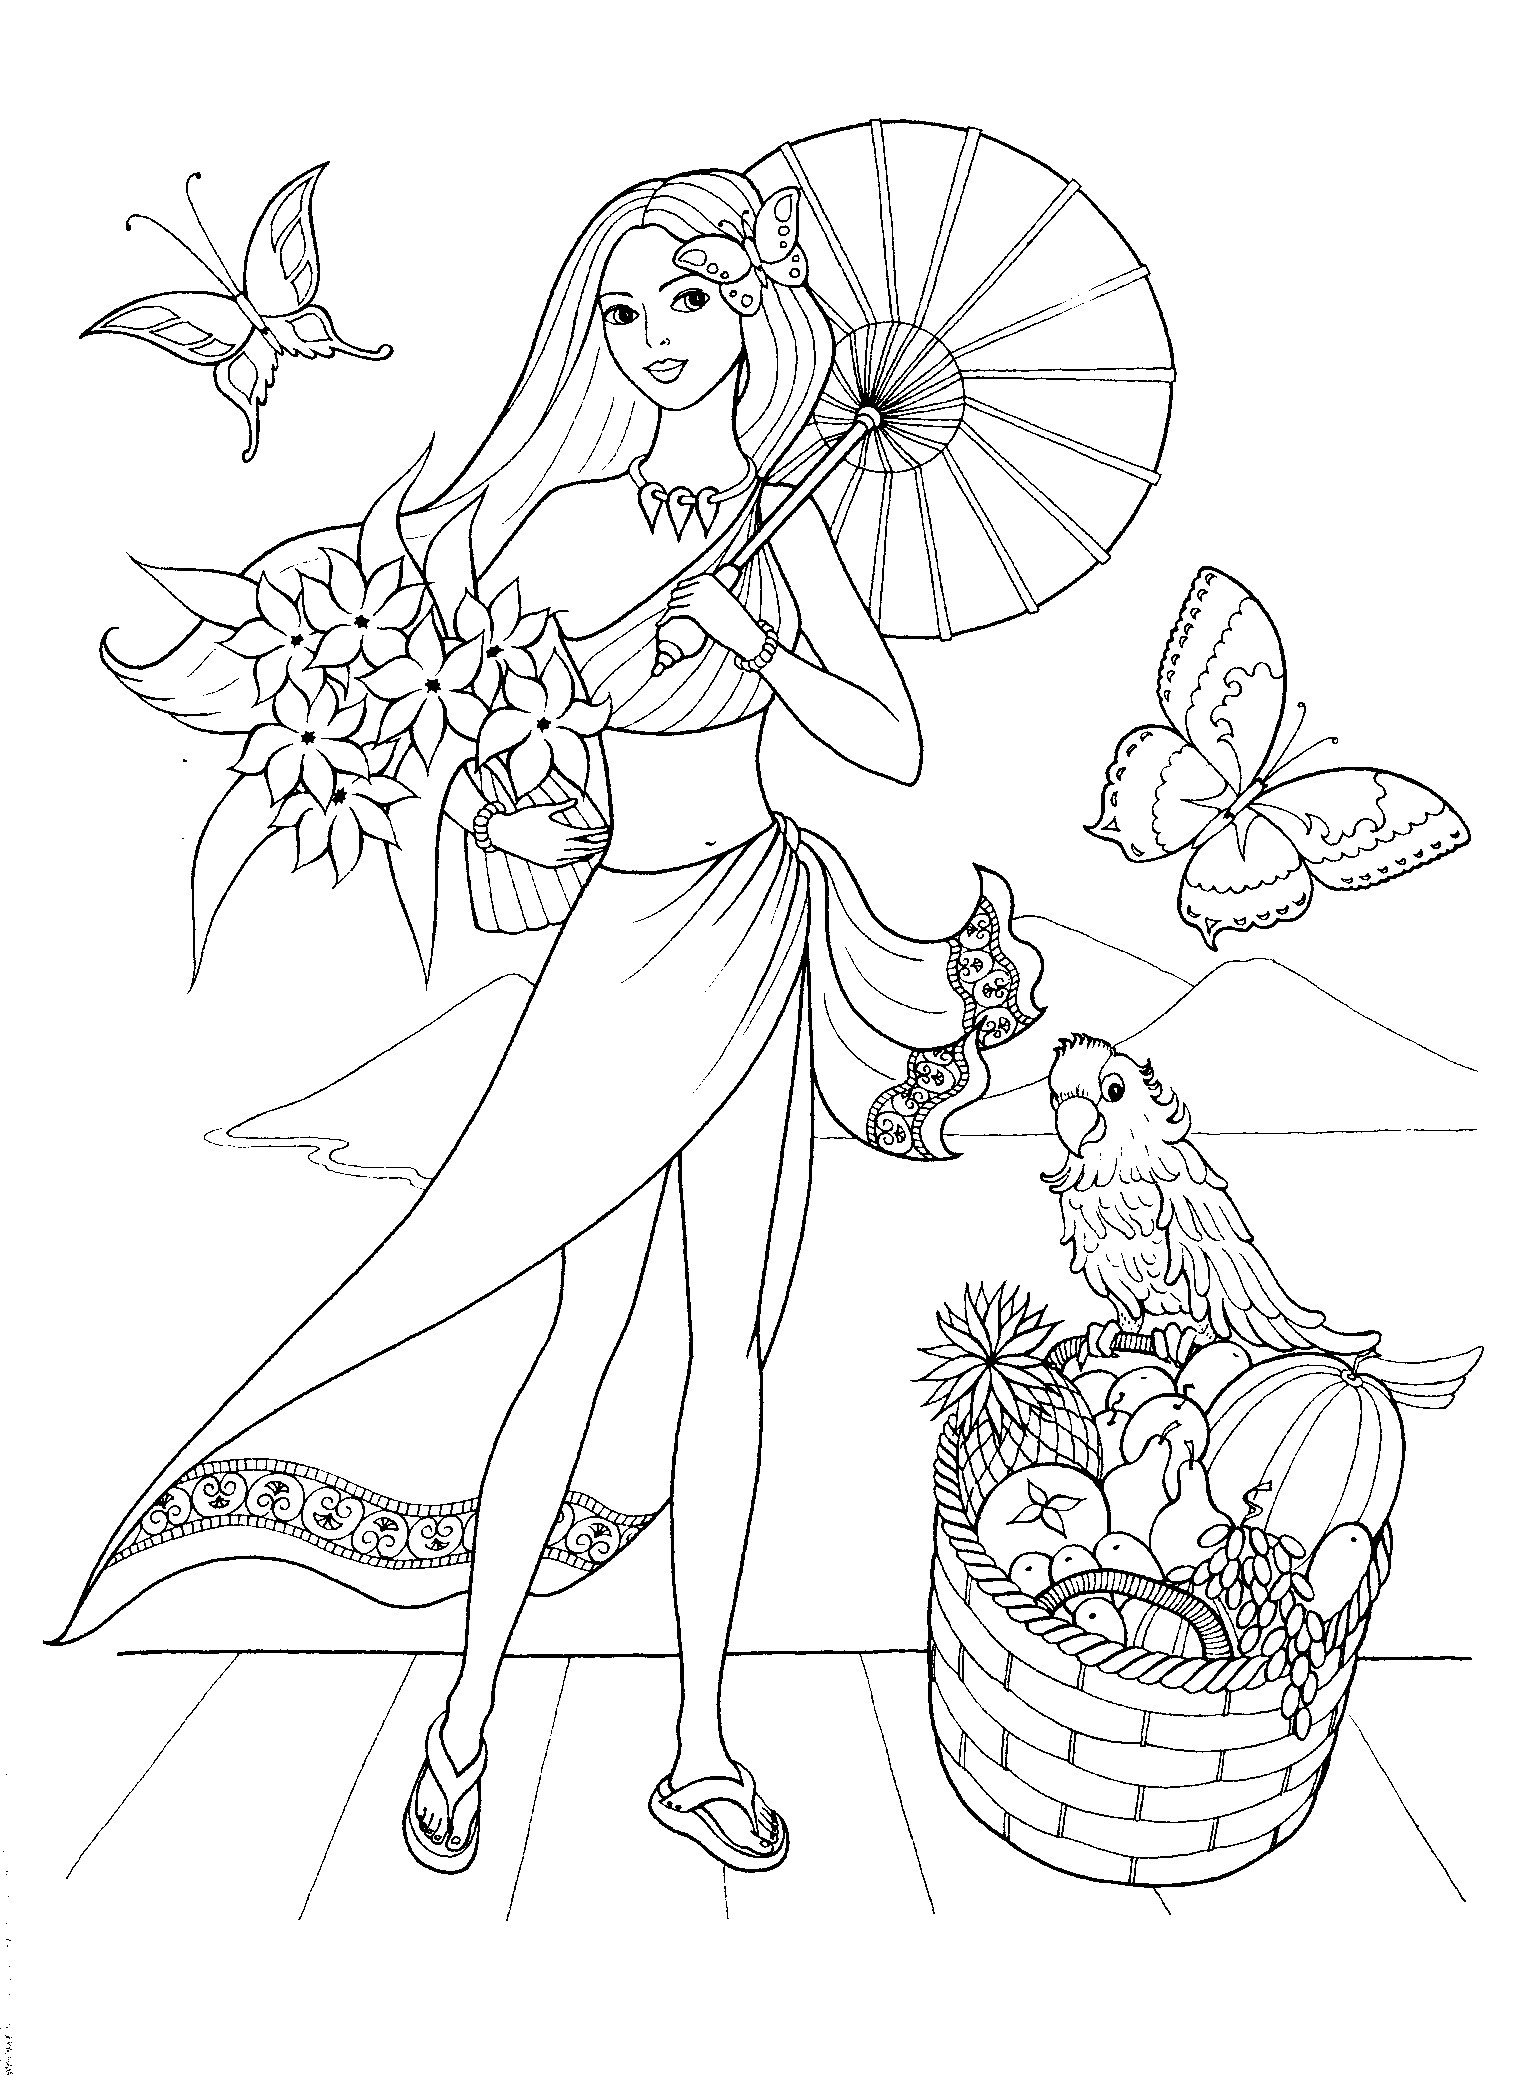 Fashion Coloring Pages For Girls
 Fashionable girls coloring pages 1 1533×2076